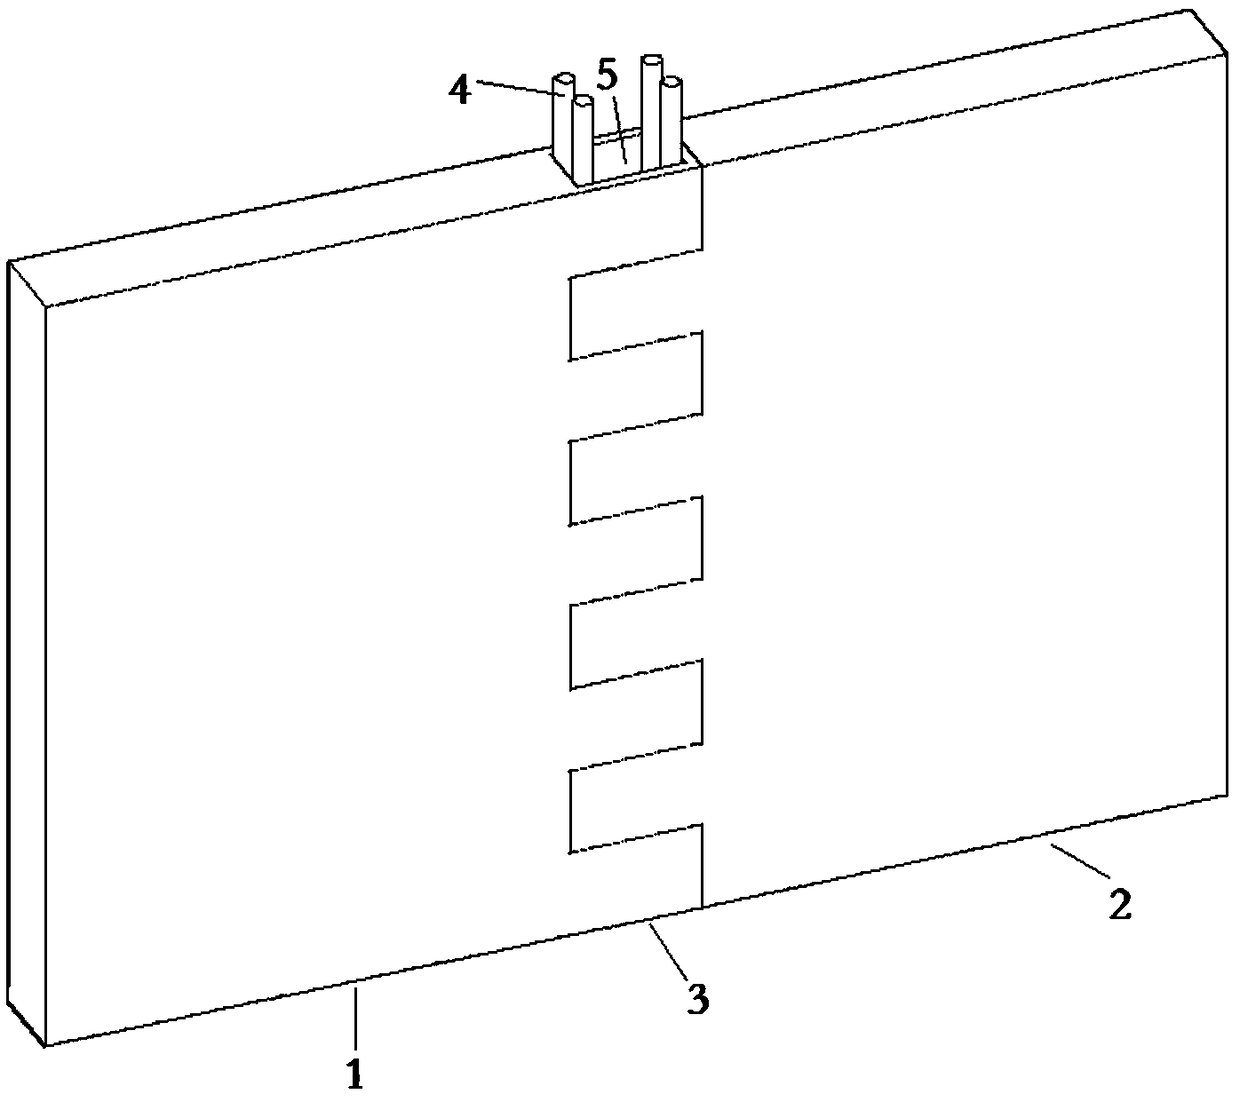 AssembLing type shear waLL verticaL seam teeth groove type connecting structure